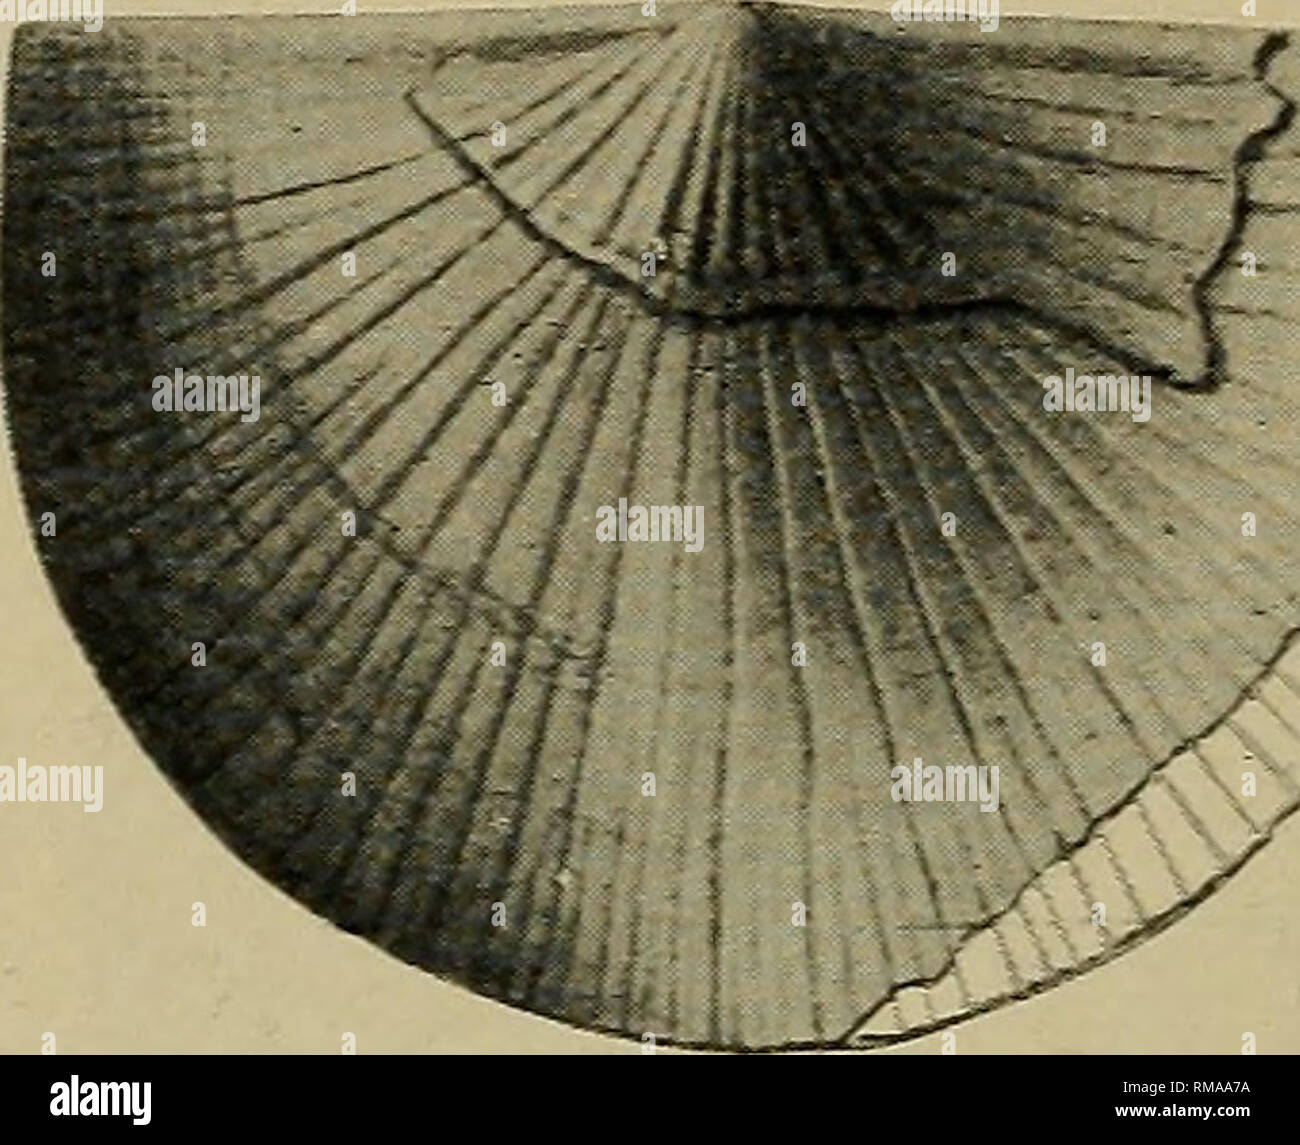 . Annual report. New York State Museum; Science; Science. S t r o p-h o n e 11 a (Amphistrophia) continens shell a series of fine threadlike lines separated by flat spaces in which lie fascicles of lesser order, sometimes but a single series consisting of six or more lines, sometimes three or more subordinate series. The general expression of the surface ornament however is that of fine sharply fasciculate striation. On the interior of the valves the surface is highly pustulose throughout except on the muscle areas, the pustules being arranged in radial rows. These are the usual characters of  Stock Photo